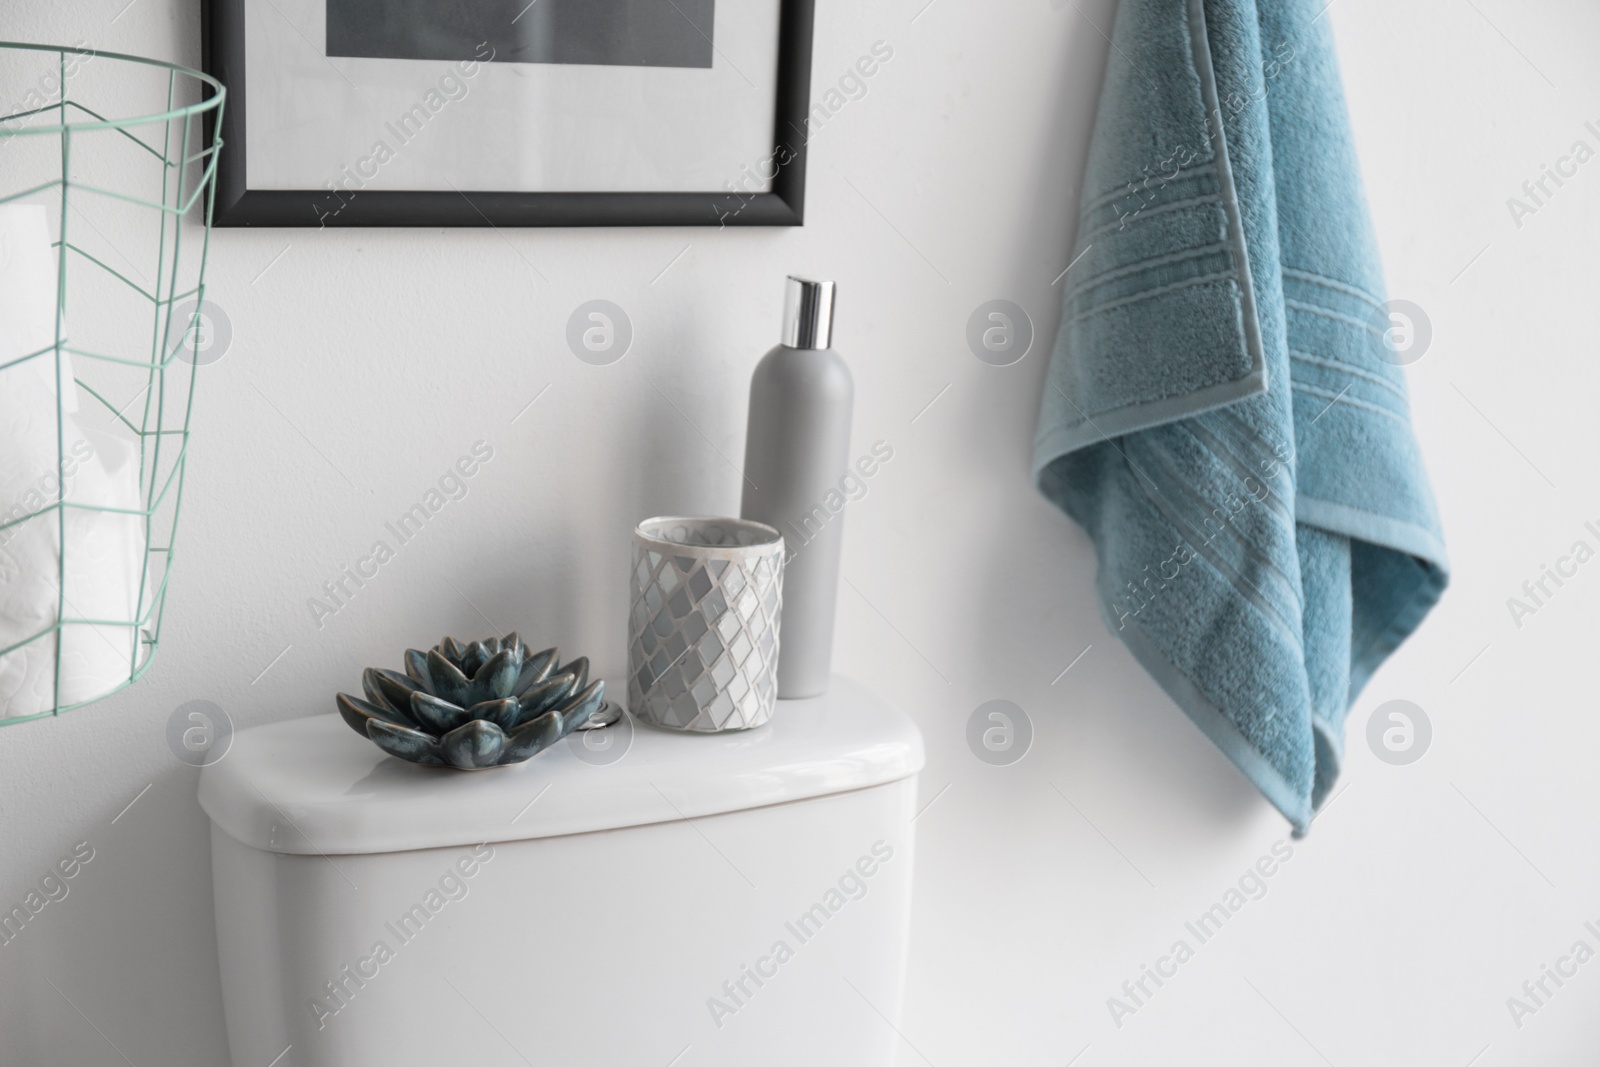 Photo of Decor elements, necessities and toilet bowl near white wall. Bathroom interior